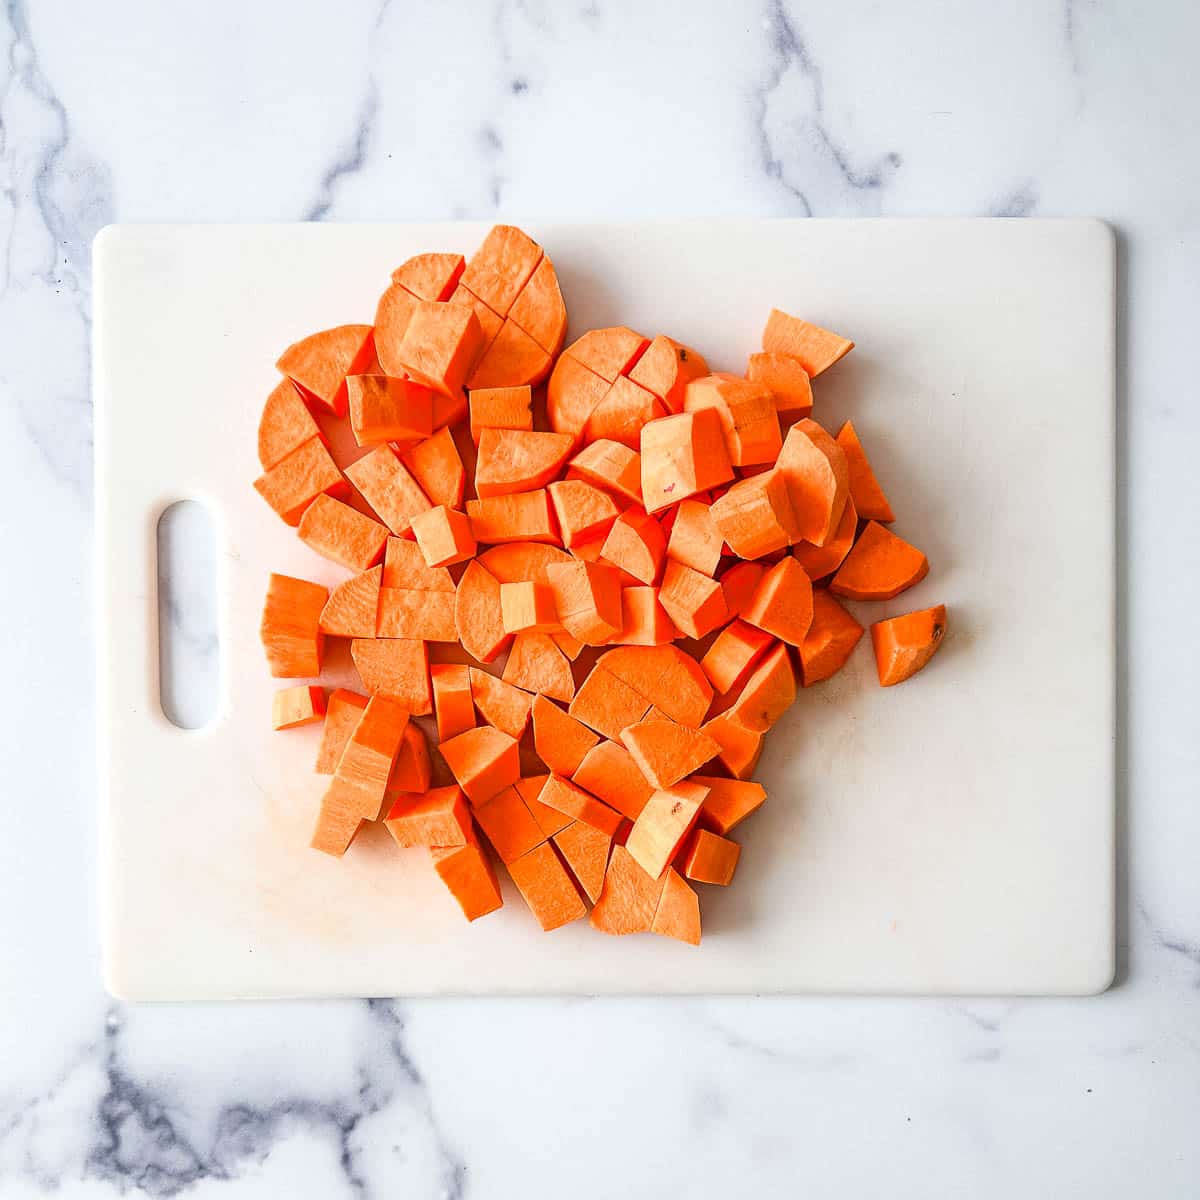 Cubed sweet potatoes on a cutting board.